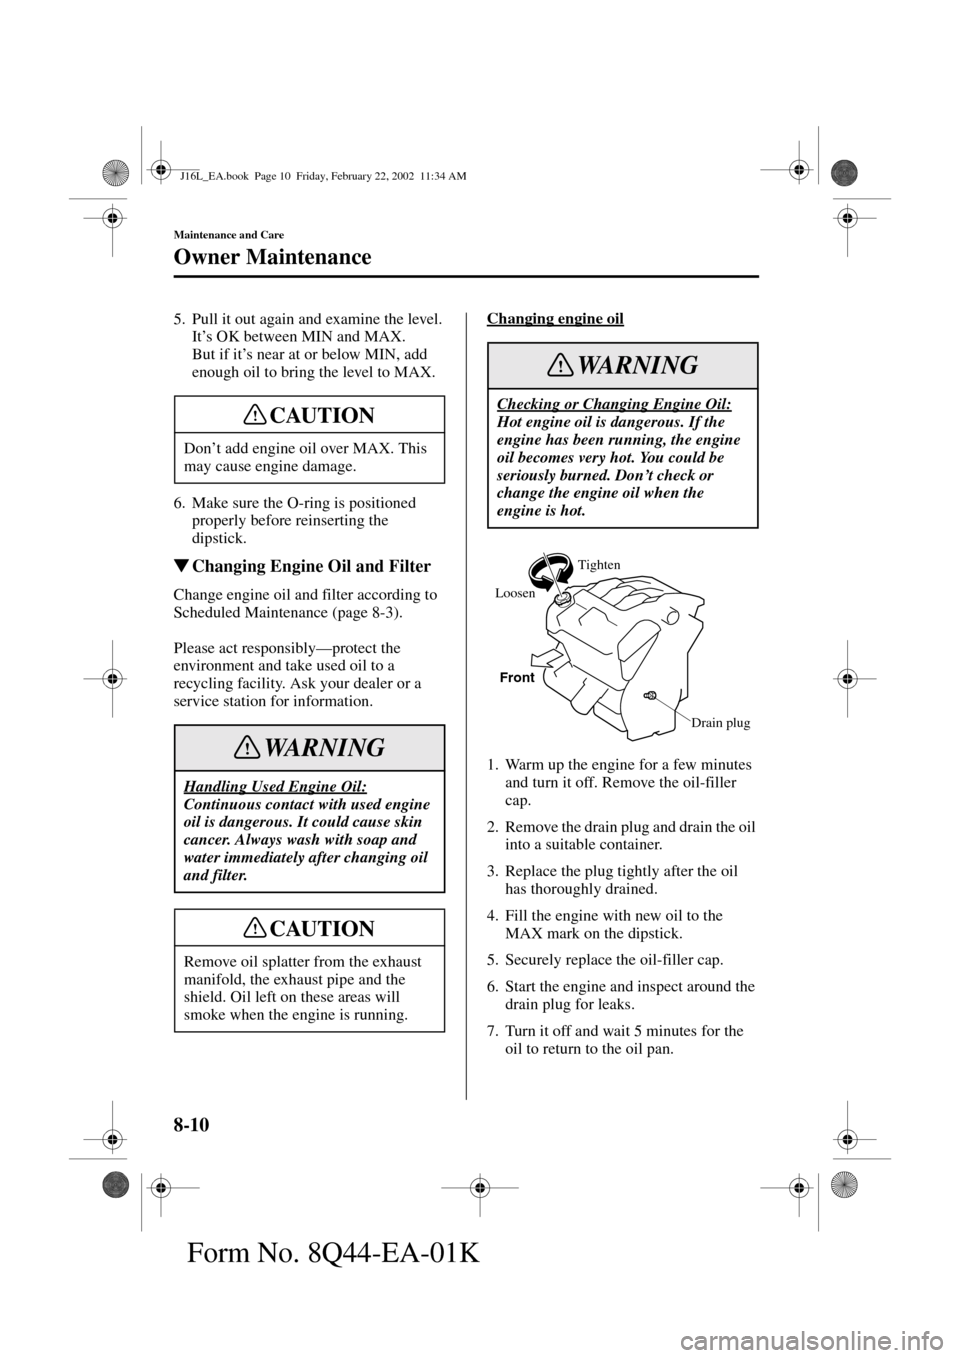 MAZDA MODEL MPV 2002  Owners Manual (in English) 8-10
Maintenance and Care
Owner Maintenance
Form No. 8Q44-EA-01K
5. Pull it out again and examine the level.
It’s OK between MIN and MAX.
But if it’s near at or below MIN, add 
enough oil to bring